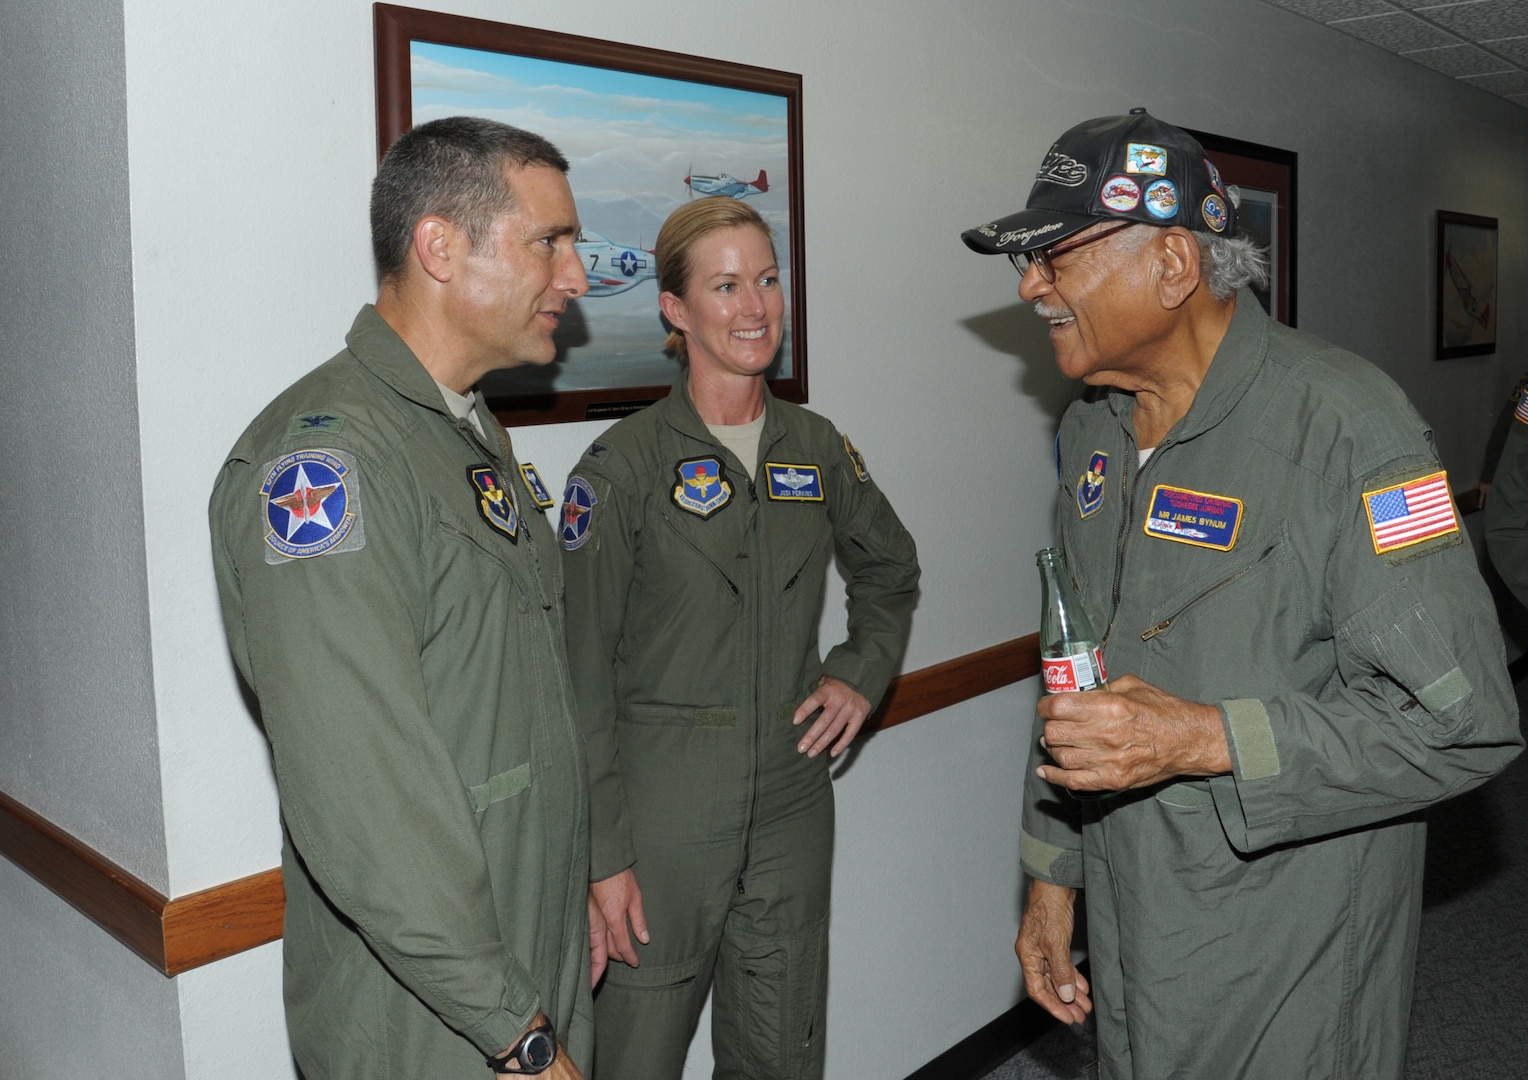 Col. Matthew Isler, left, 12th Flying Training Wing commander and Col. Jodi Perkins, 12th Flying Training Wing vice commander speak to James Bynum, Tuskegee Airman, during the Tuskegee Airmen Tribute 2015, June 11, at Joint Base San Antonio-Randolph. The Tuskegee Airmen were the first African-American military aviators in the United States Armed Forces beginning in World War II.(U.S. Air Force photo by Joel Martinez)